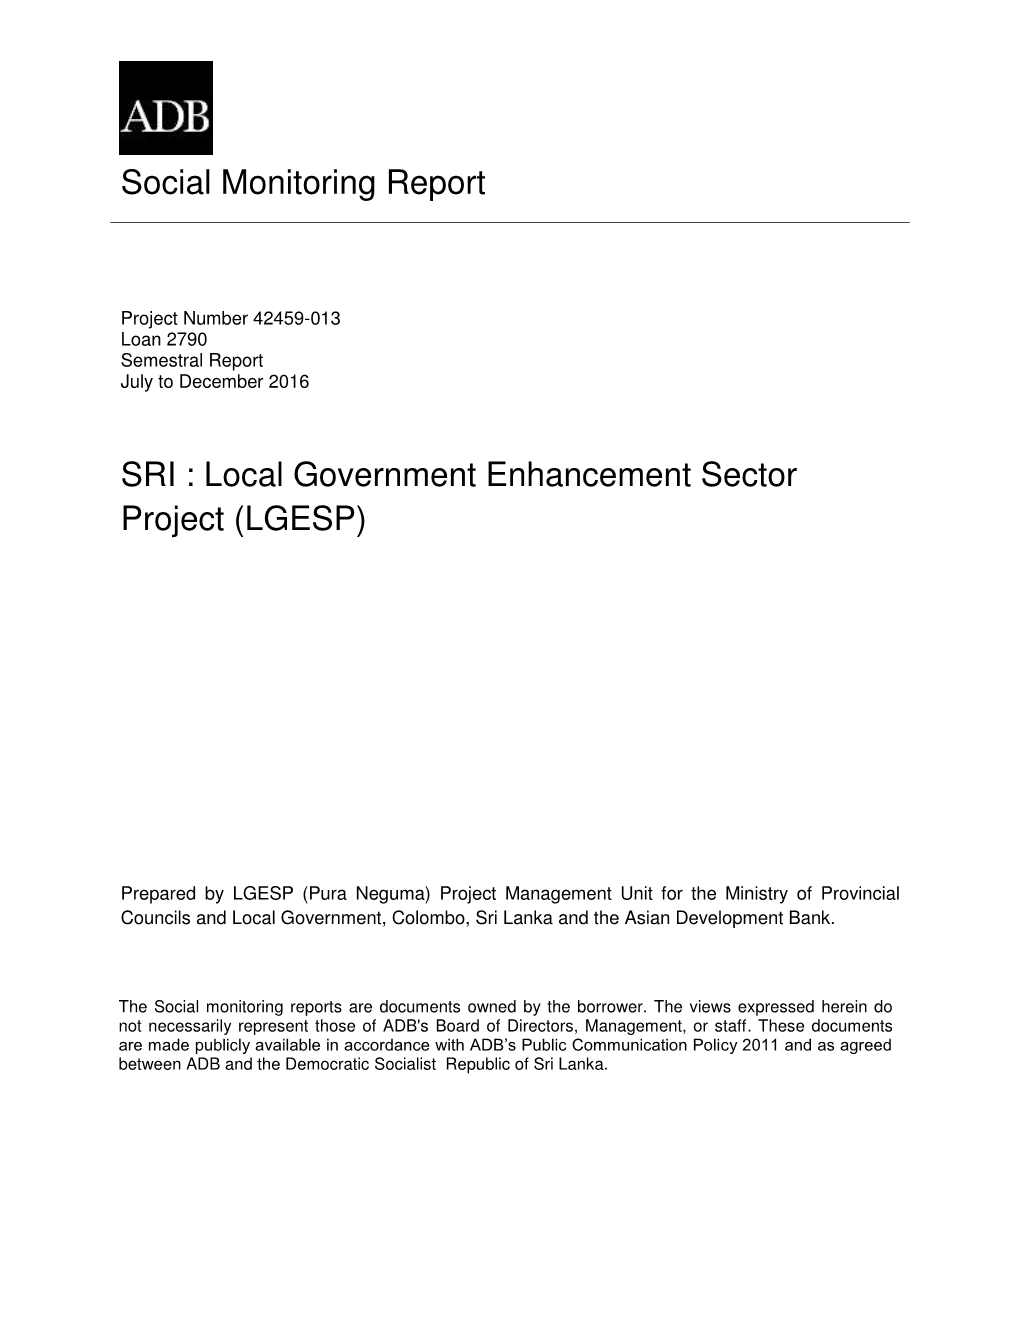 SRI : Local Government Enhancement Sector Project (LGESP)